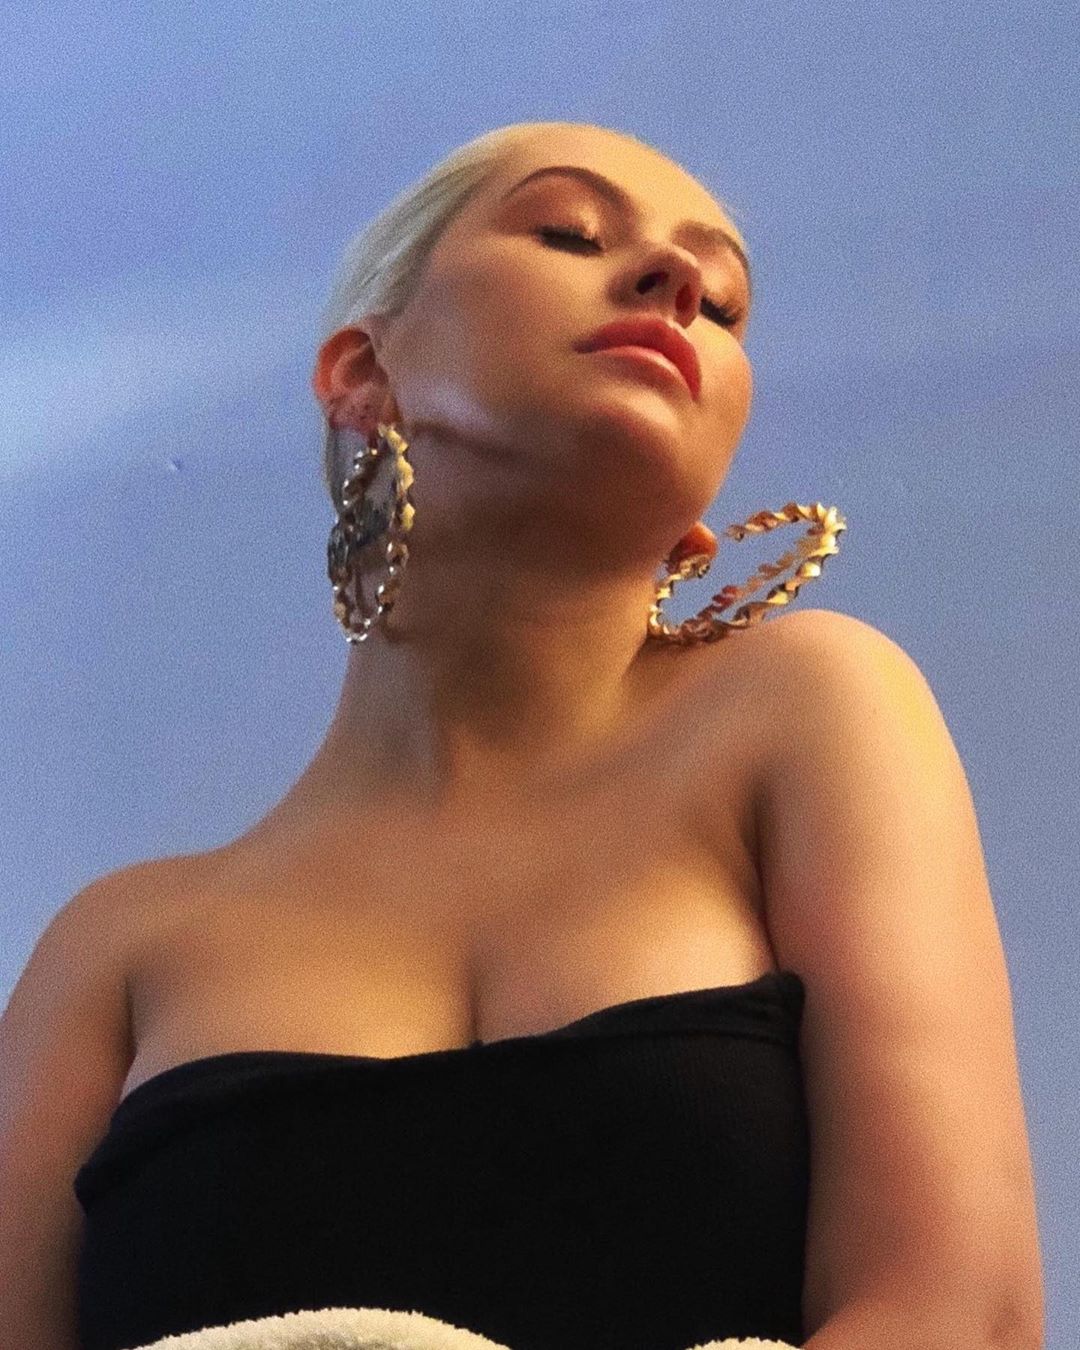 Photos n°7 : Christina Aguilera Turns 40 in Style!